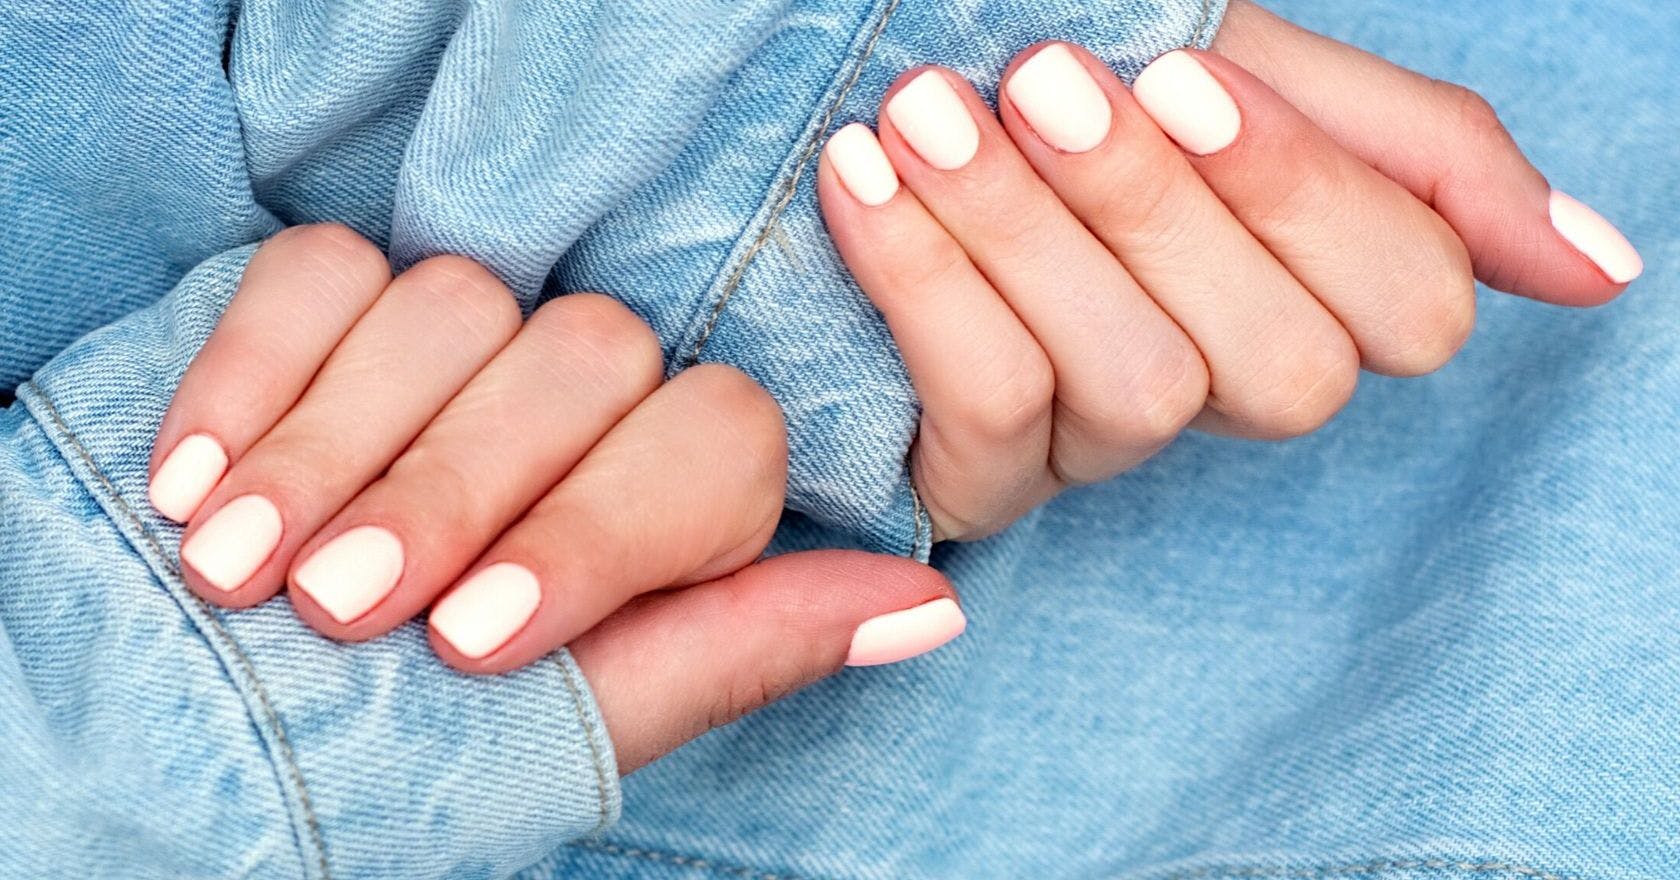 How to make nails grow stronger and longer